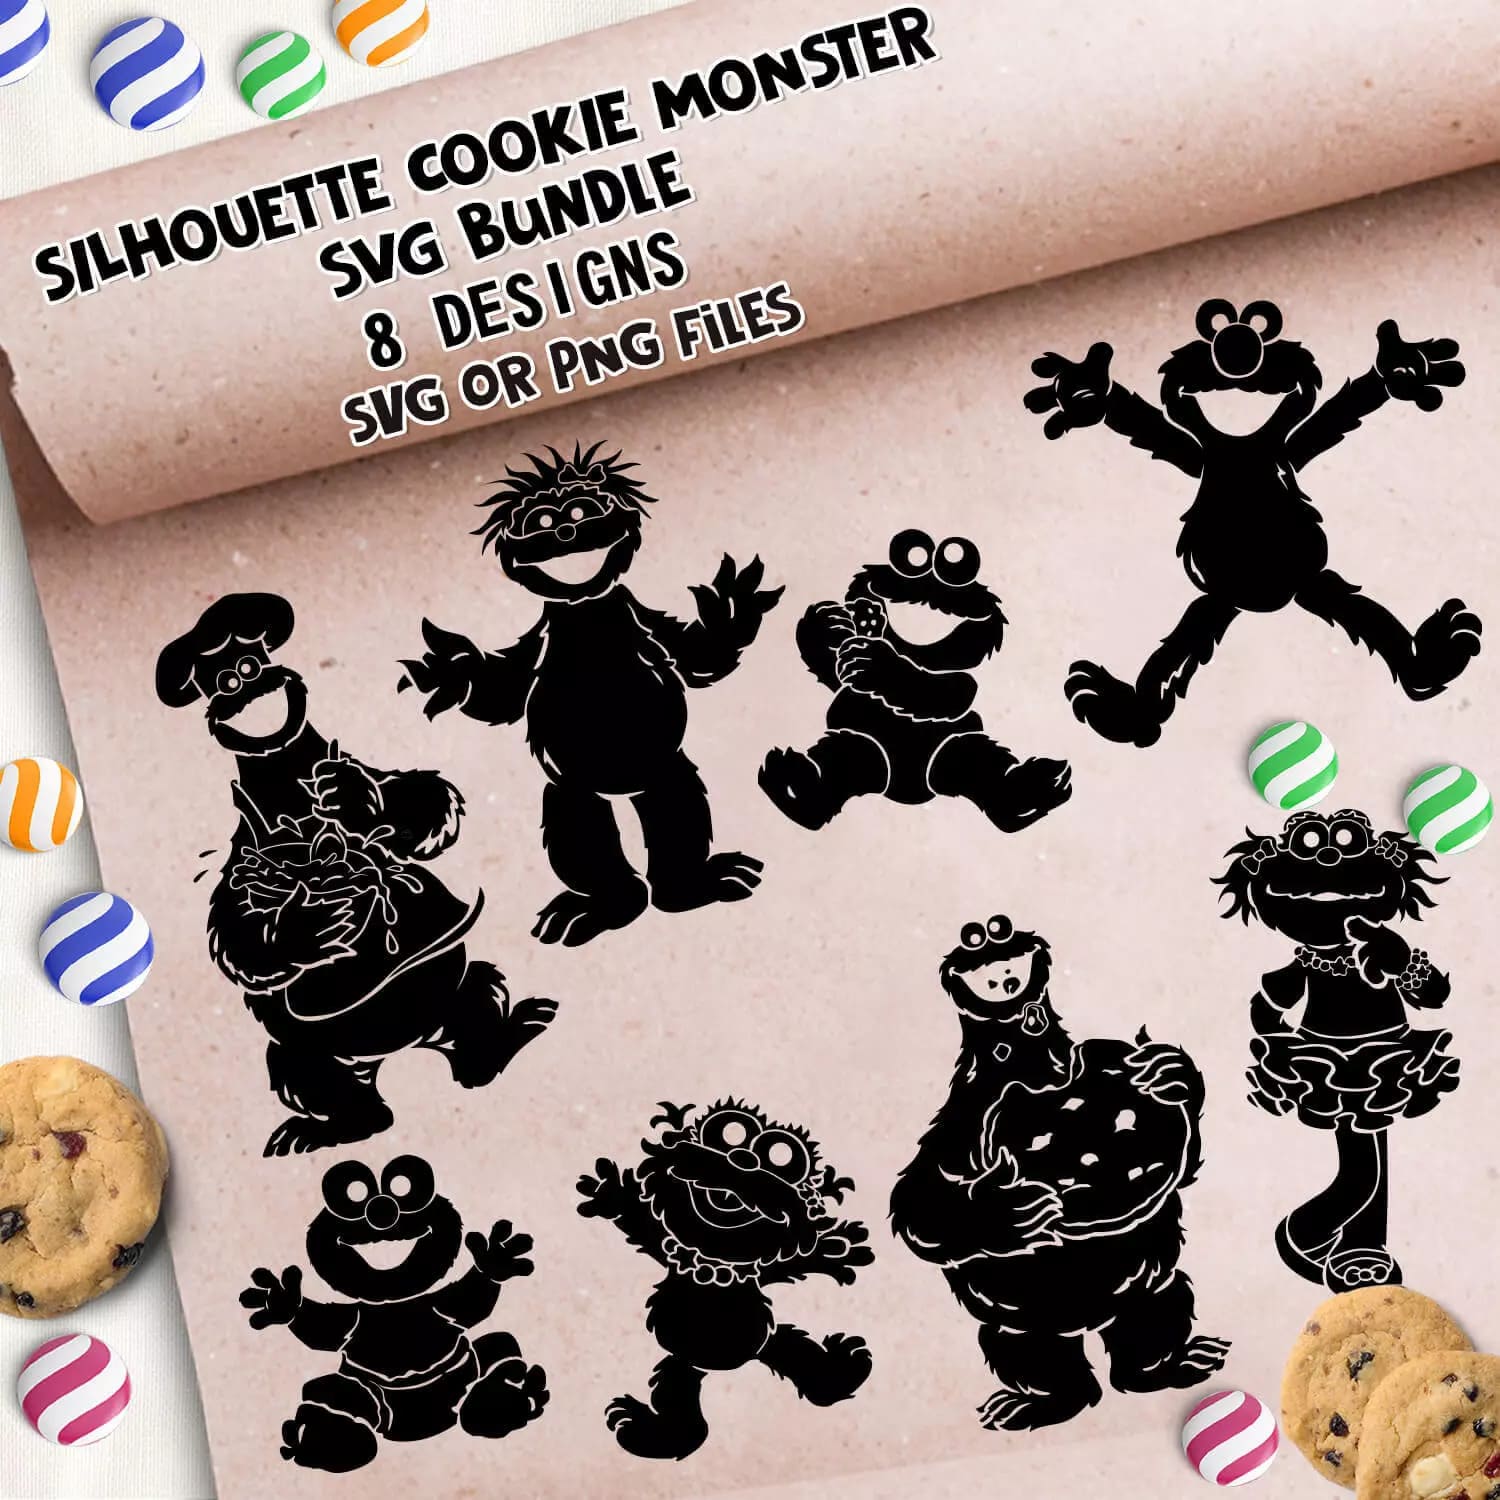 Silhouette Cookie Monster SVG Preview 3.